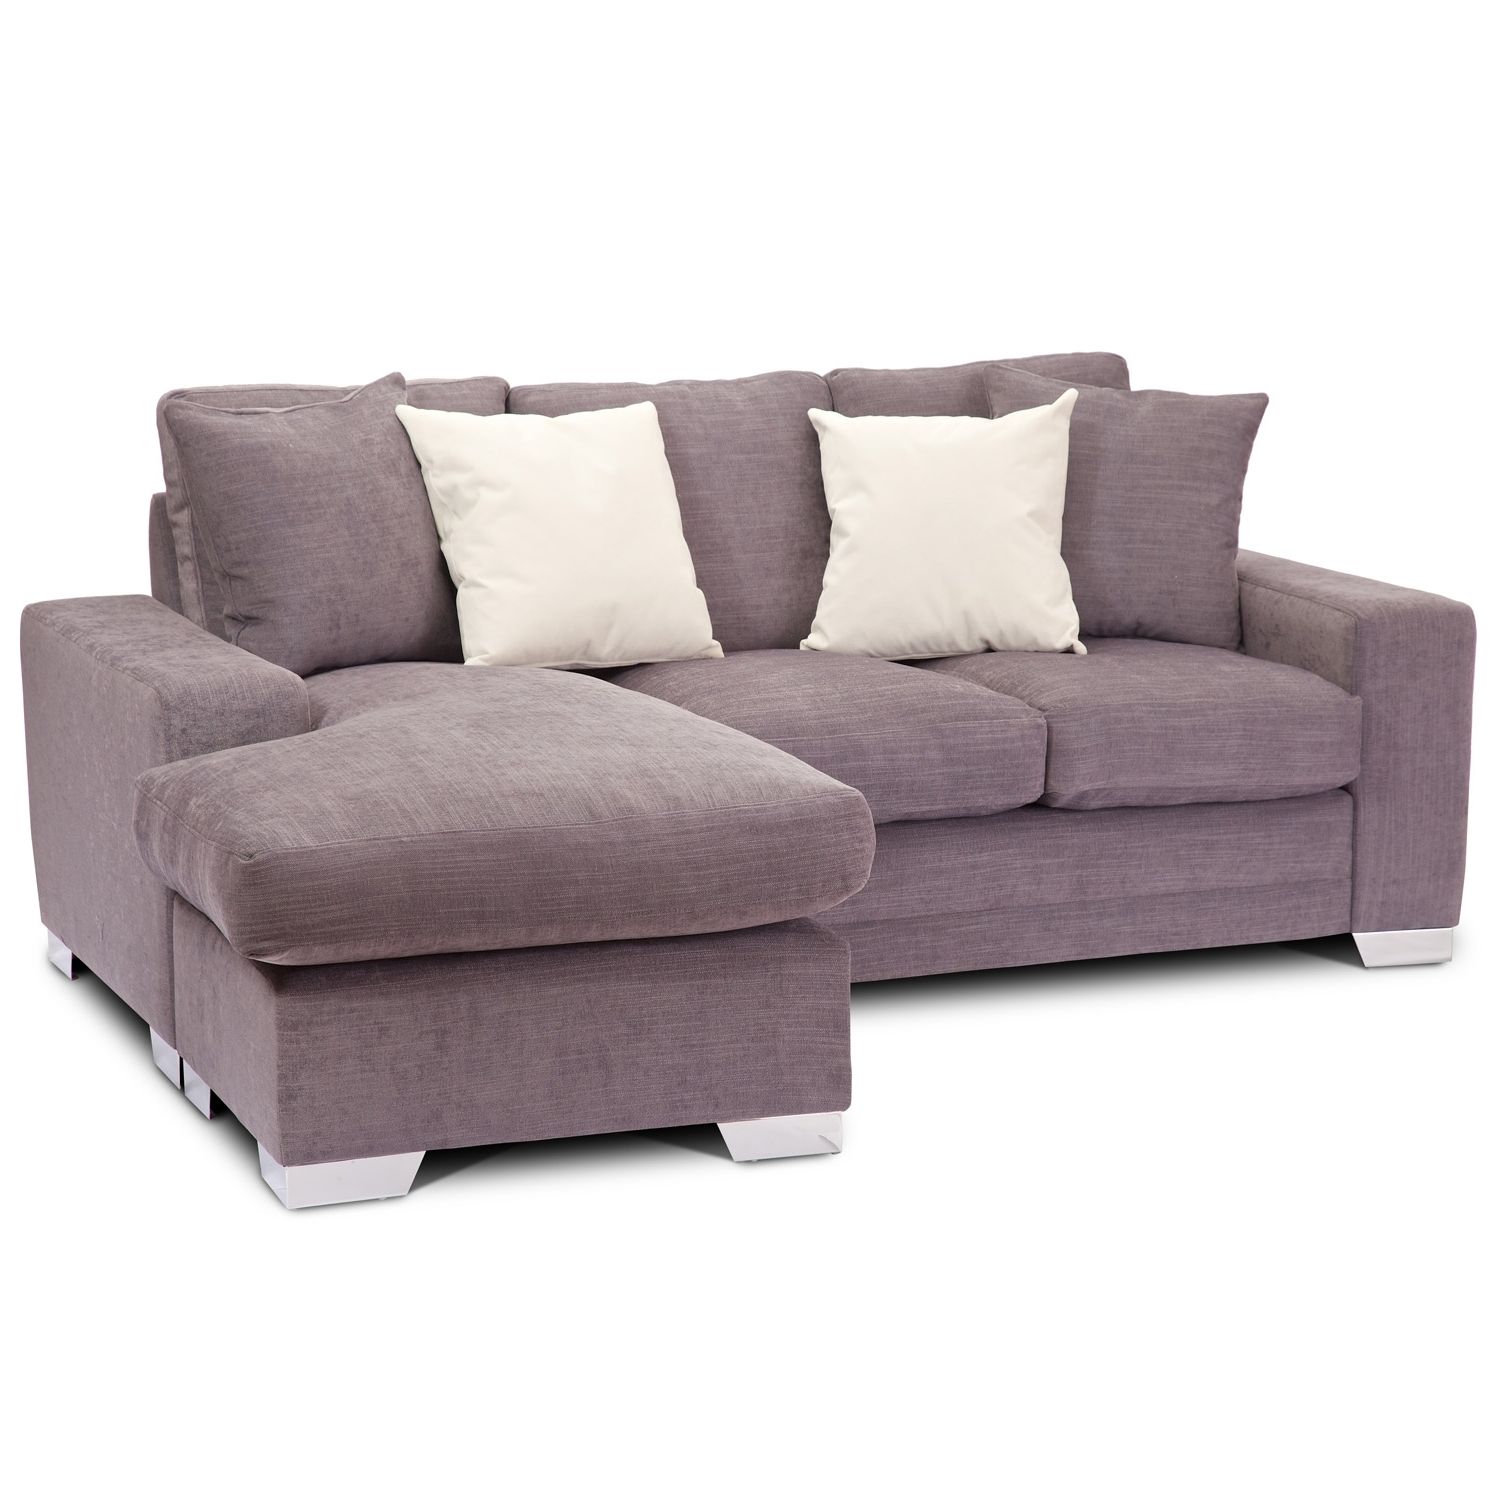 Trendy Chaise Lounge Sofa Beds Pertaining To Sofas: Classic Meets Contemporary Chaise Sofa Bed For Ideal Living (View 10 of 15)